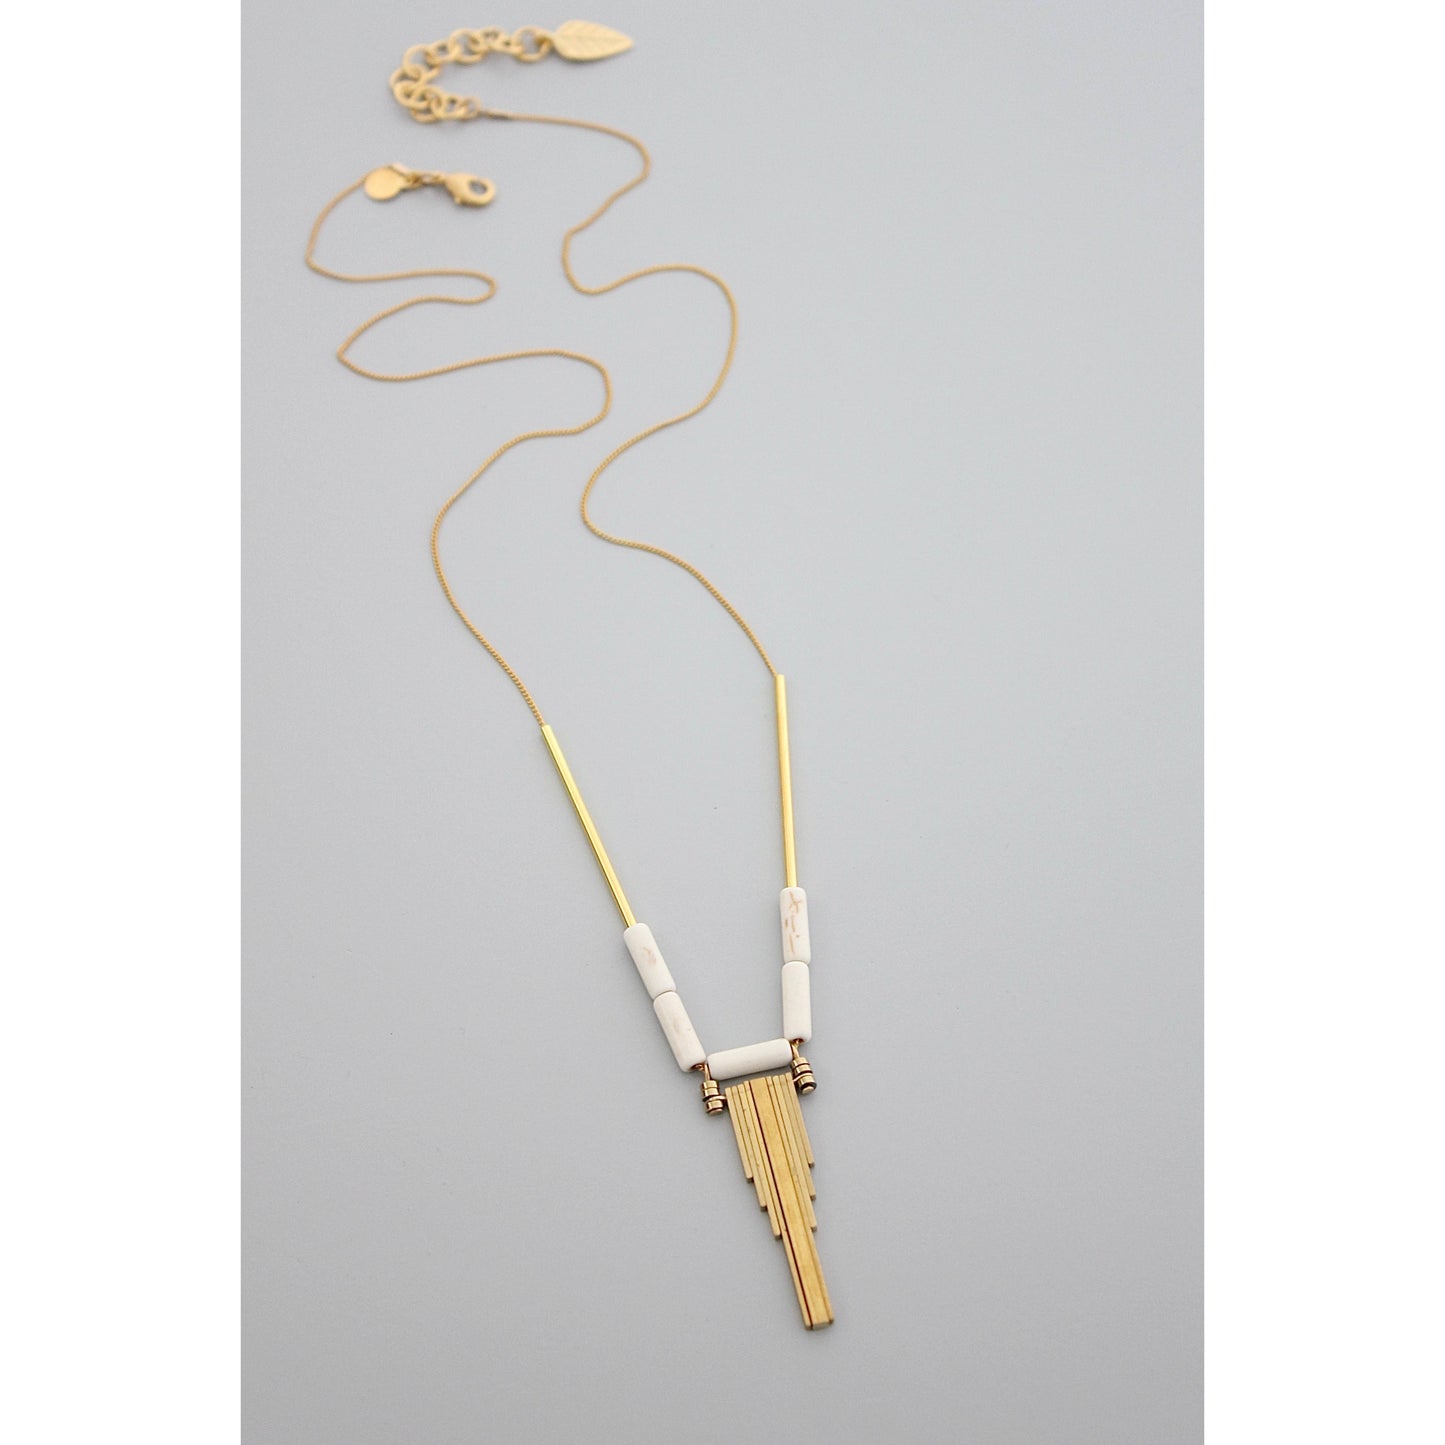 GND524 white magnesite geometric chain necklace